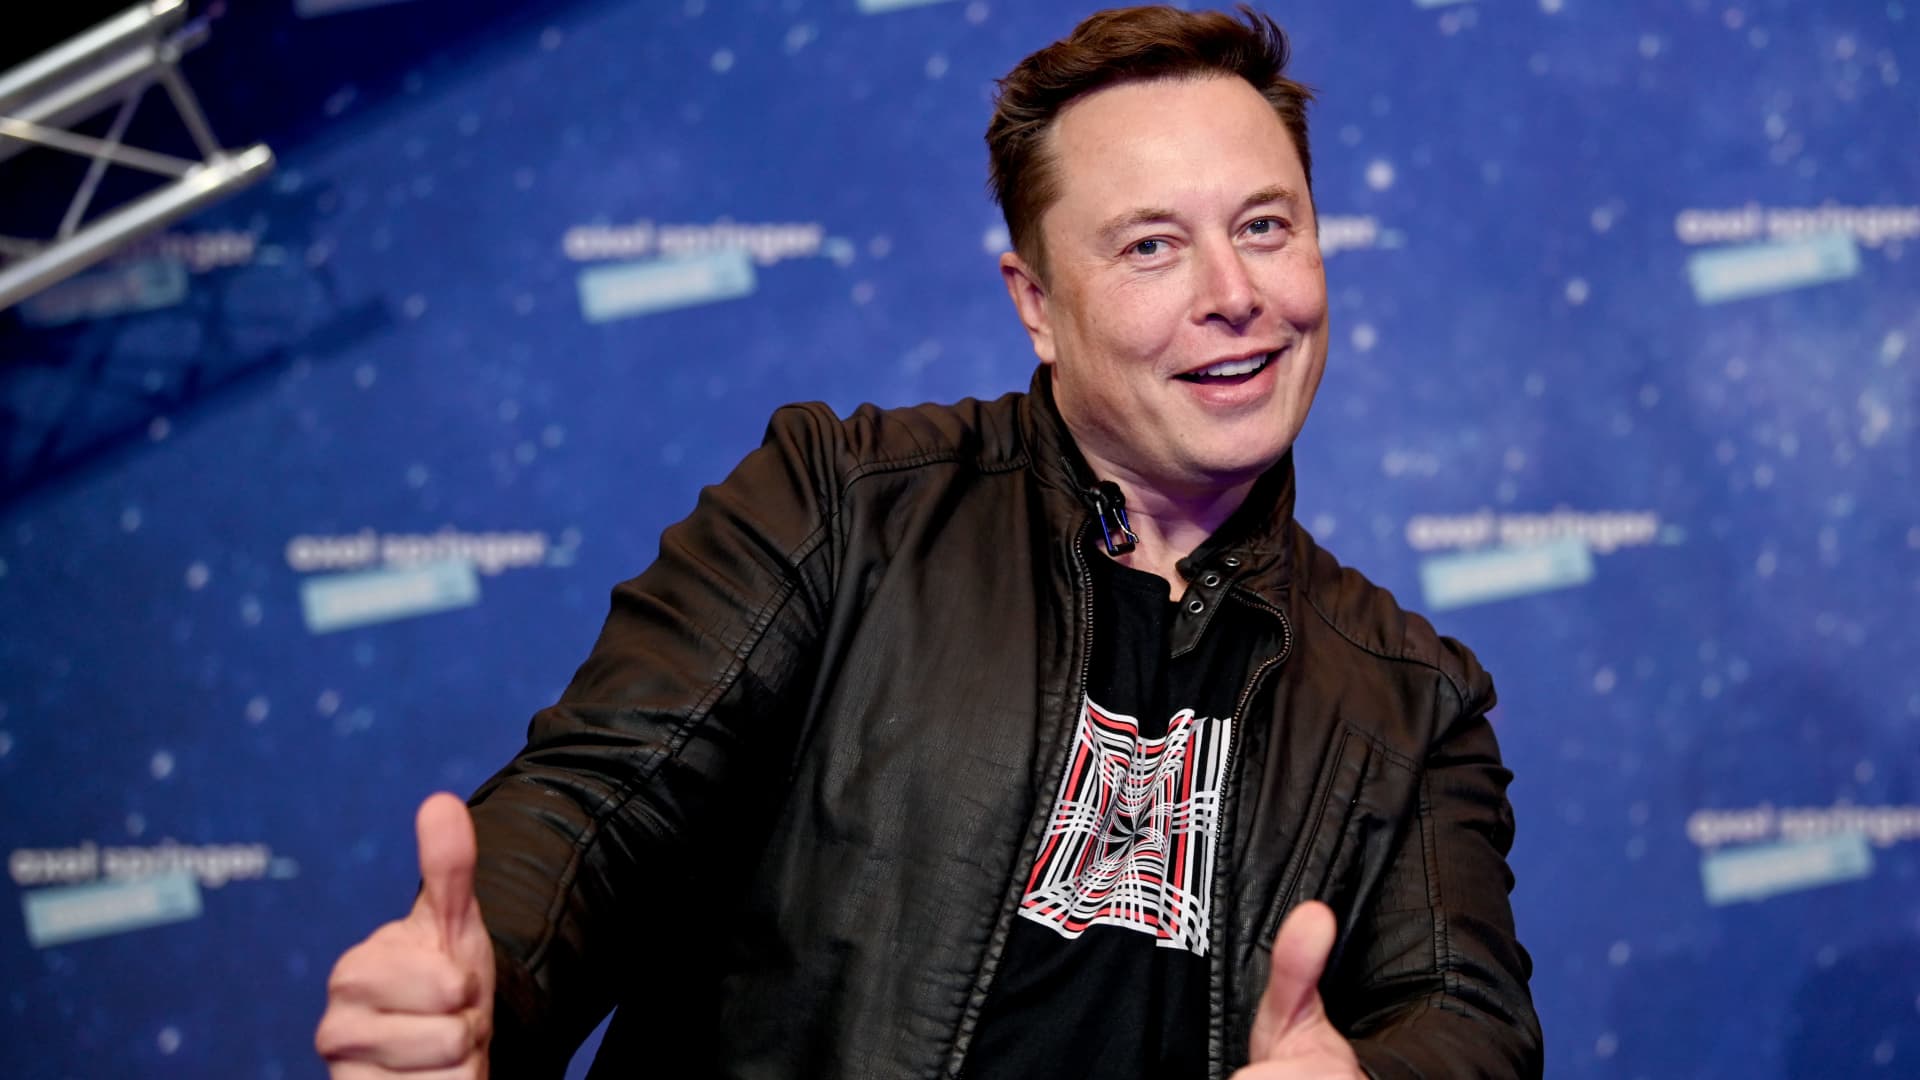 Elon Musk’s Twitter board seat raises questions about his plans for the company